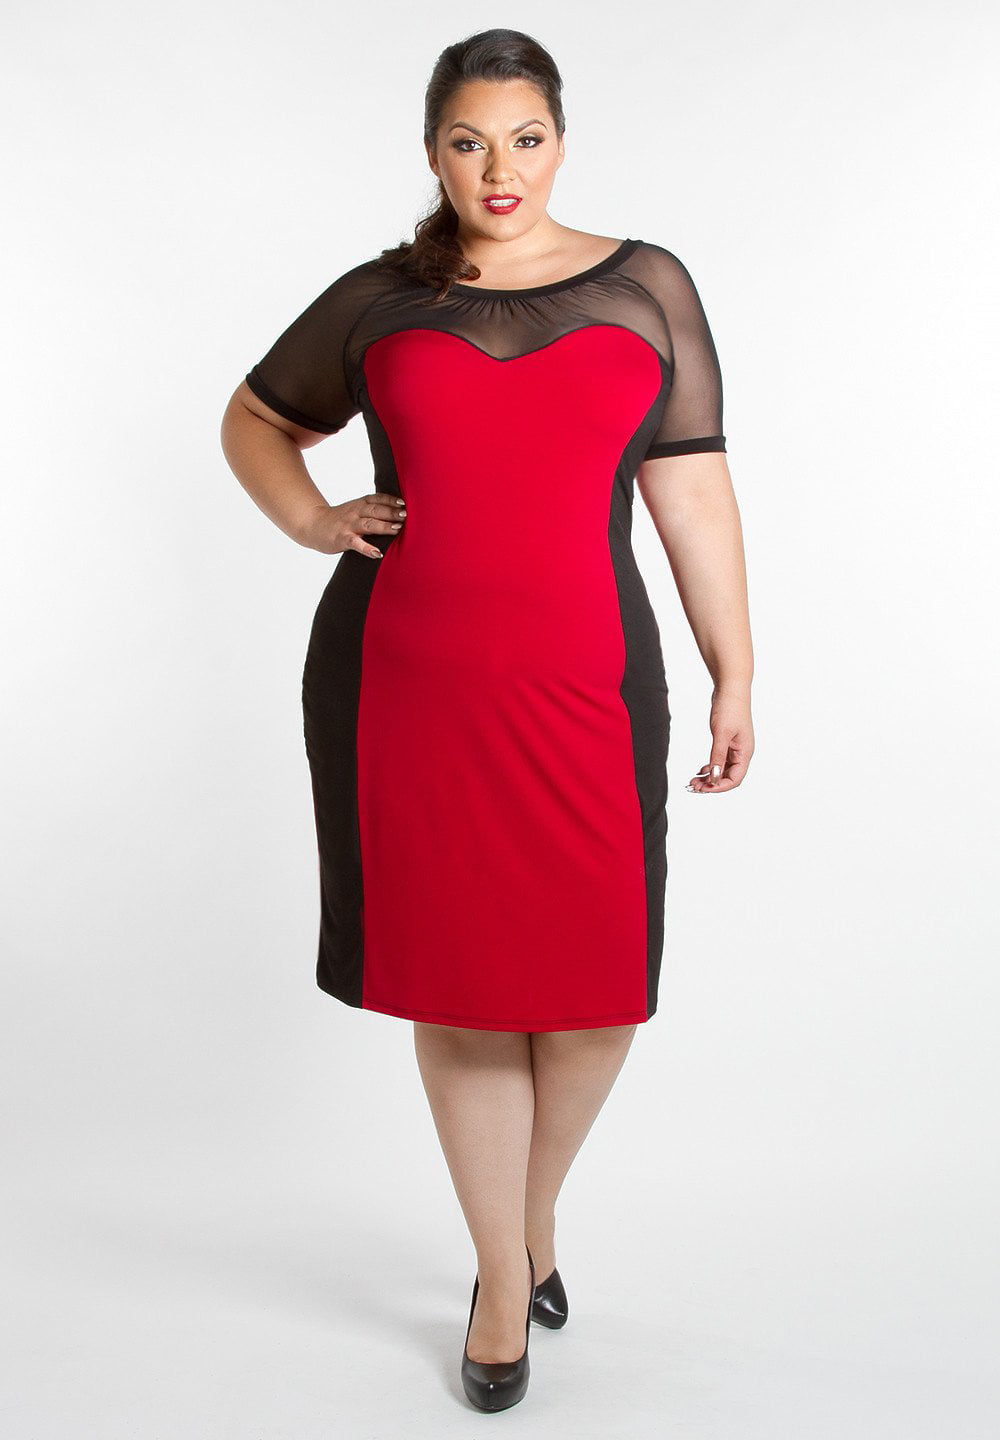 sealed with a kiss bodycon dress